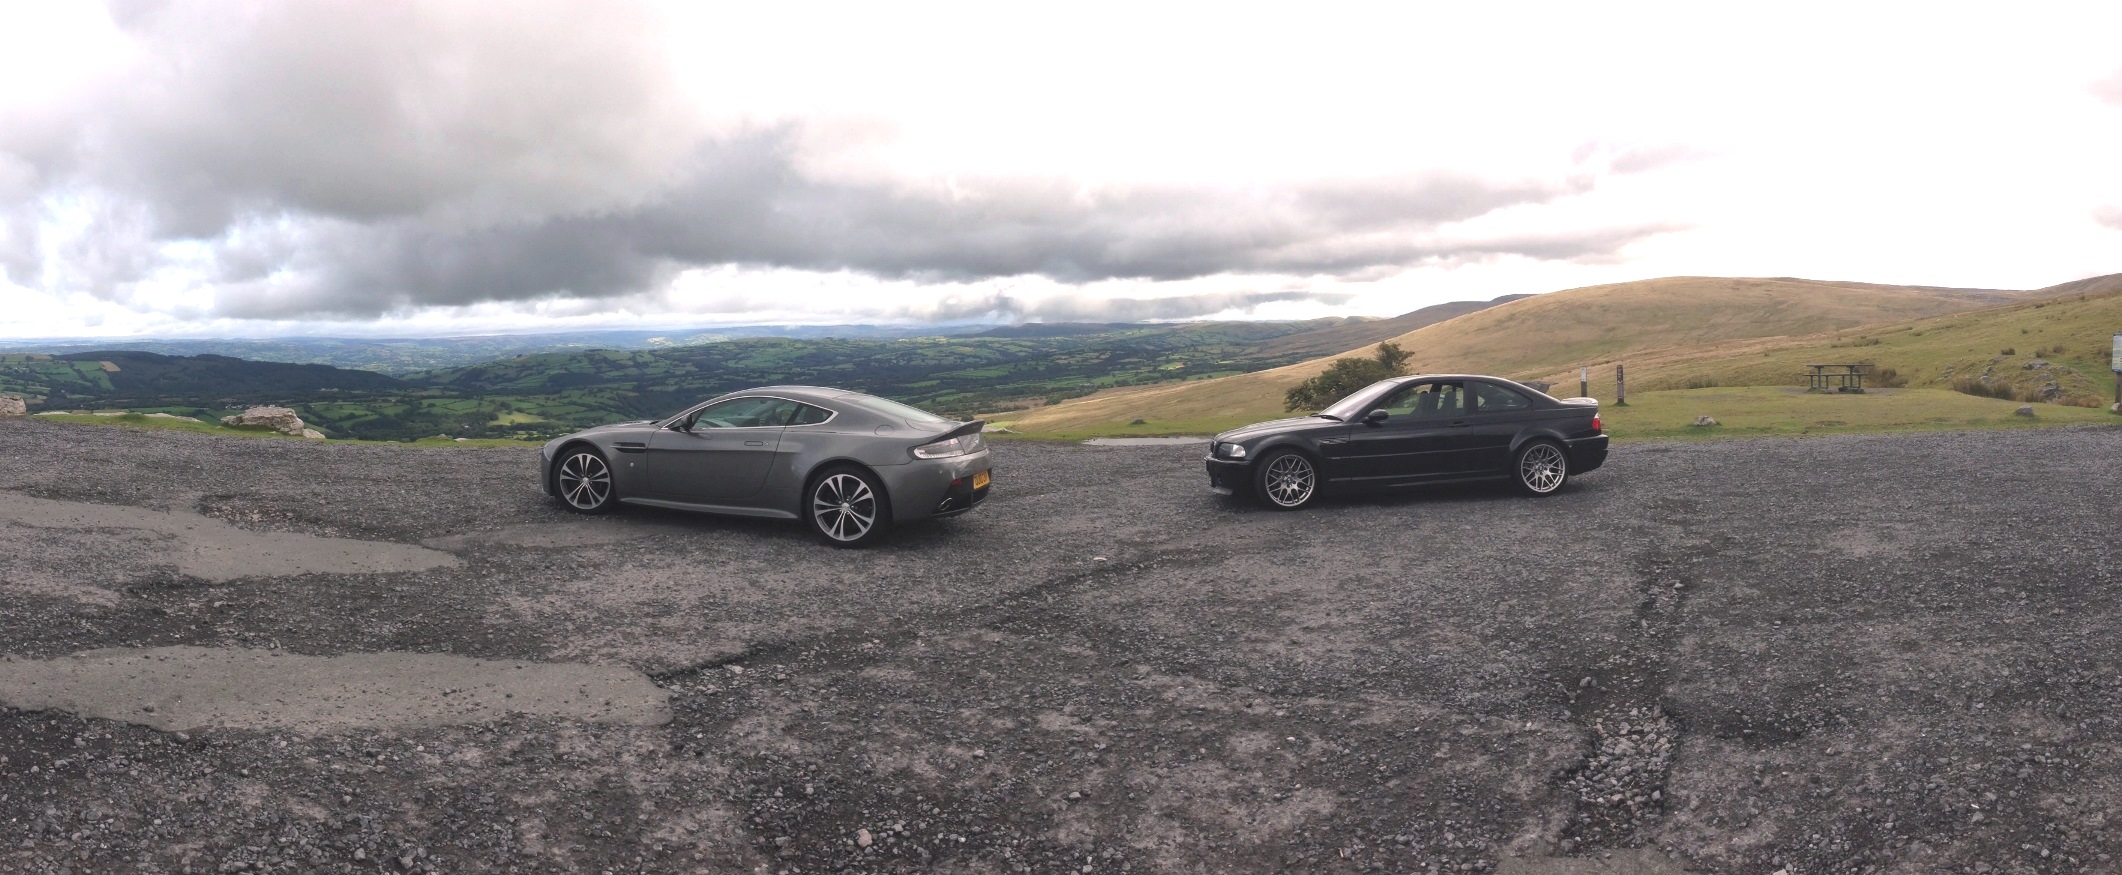 Aston Martin V12 Vantage and BMW M3 CSL in Wales